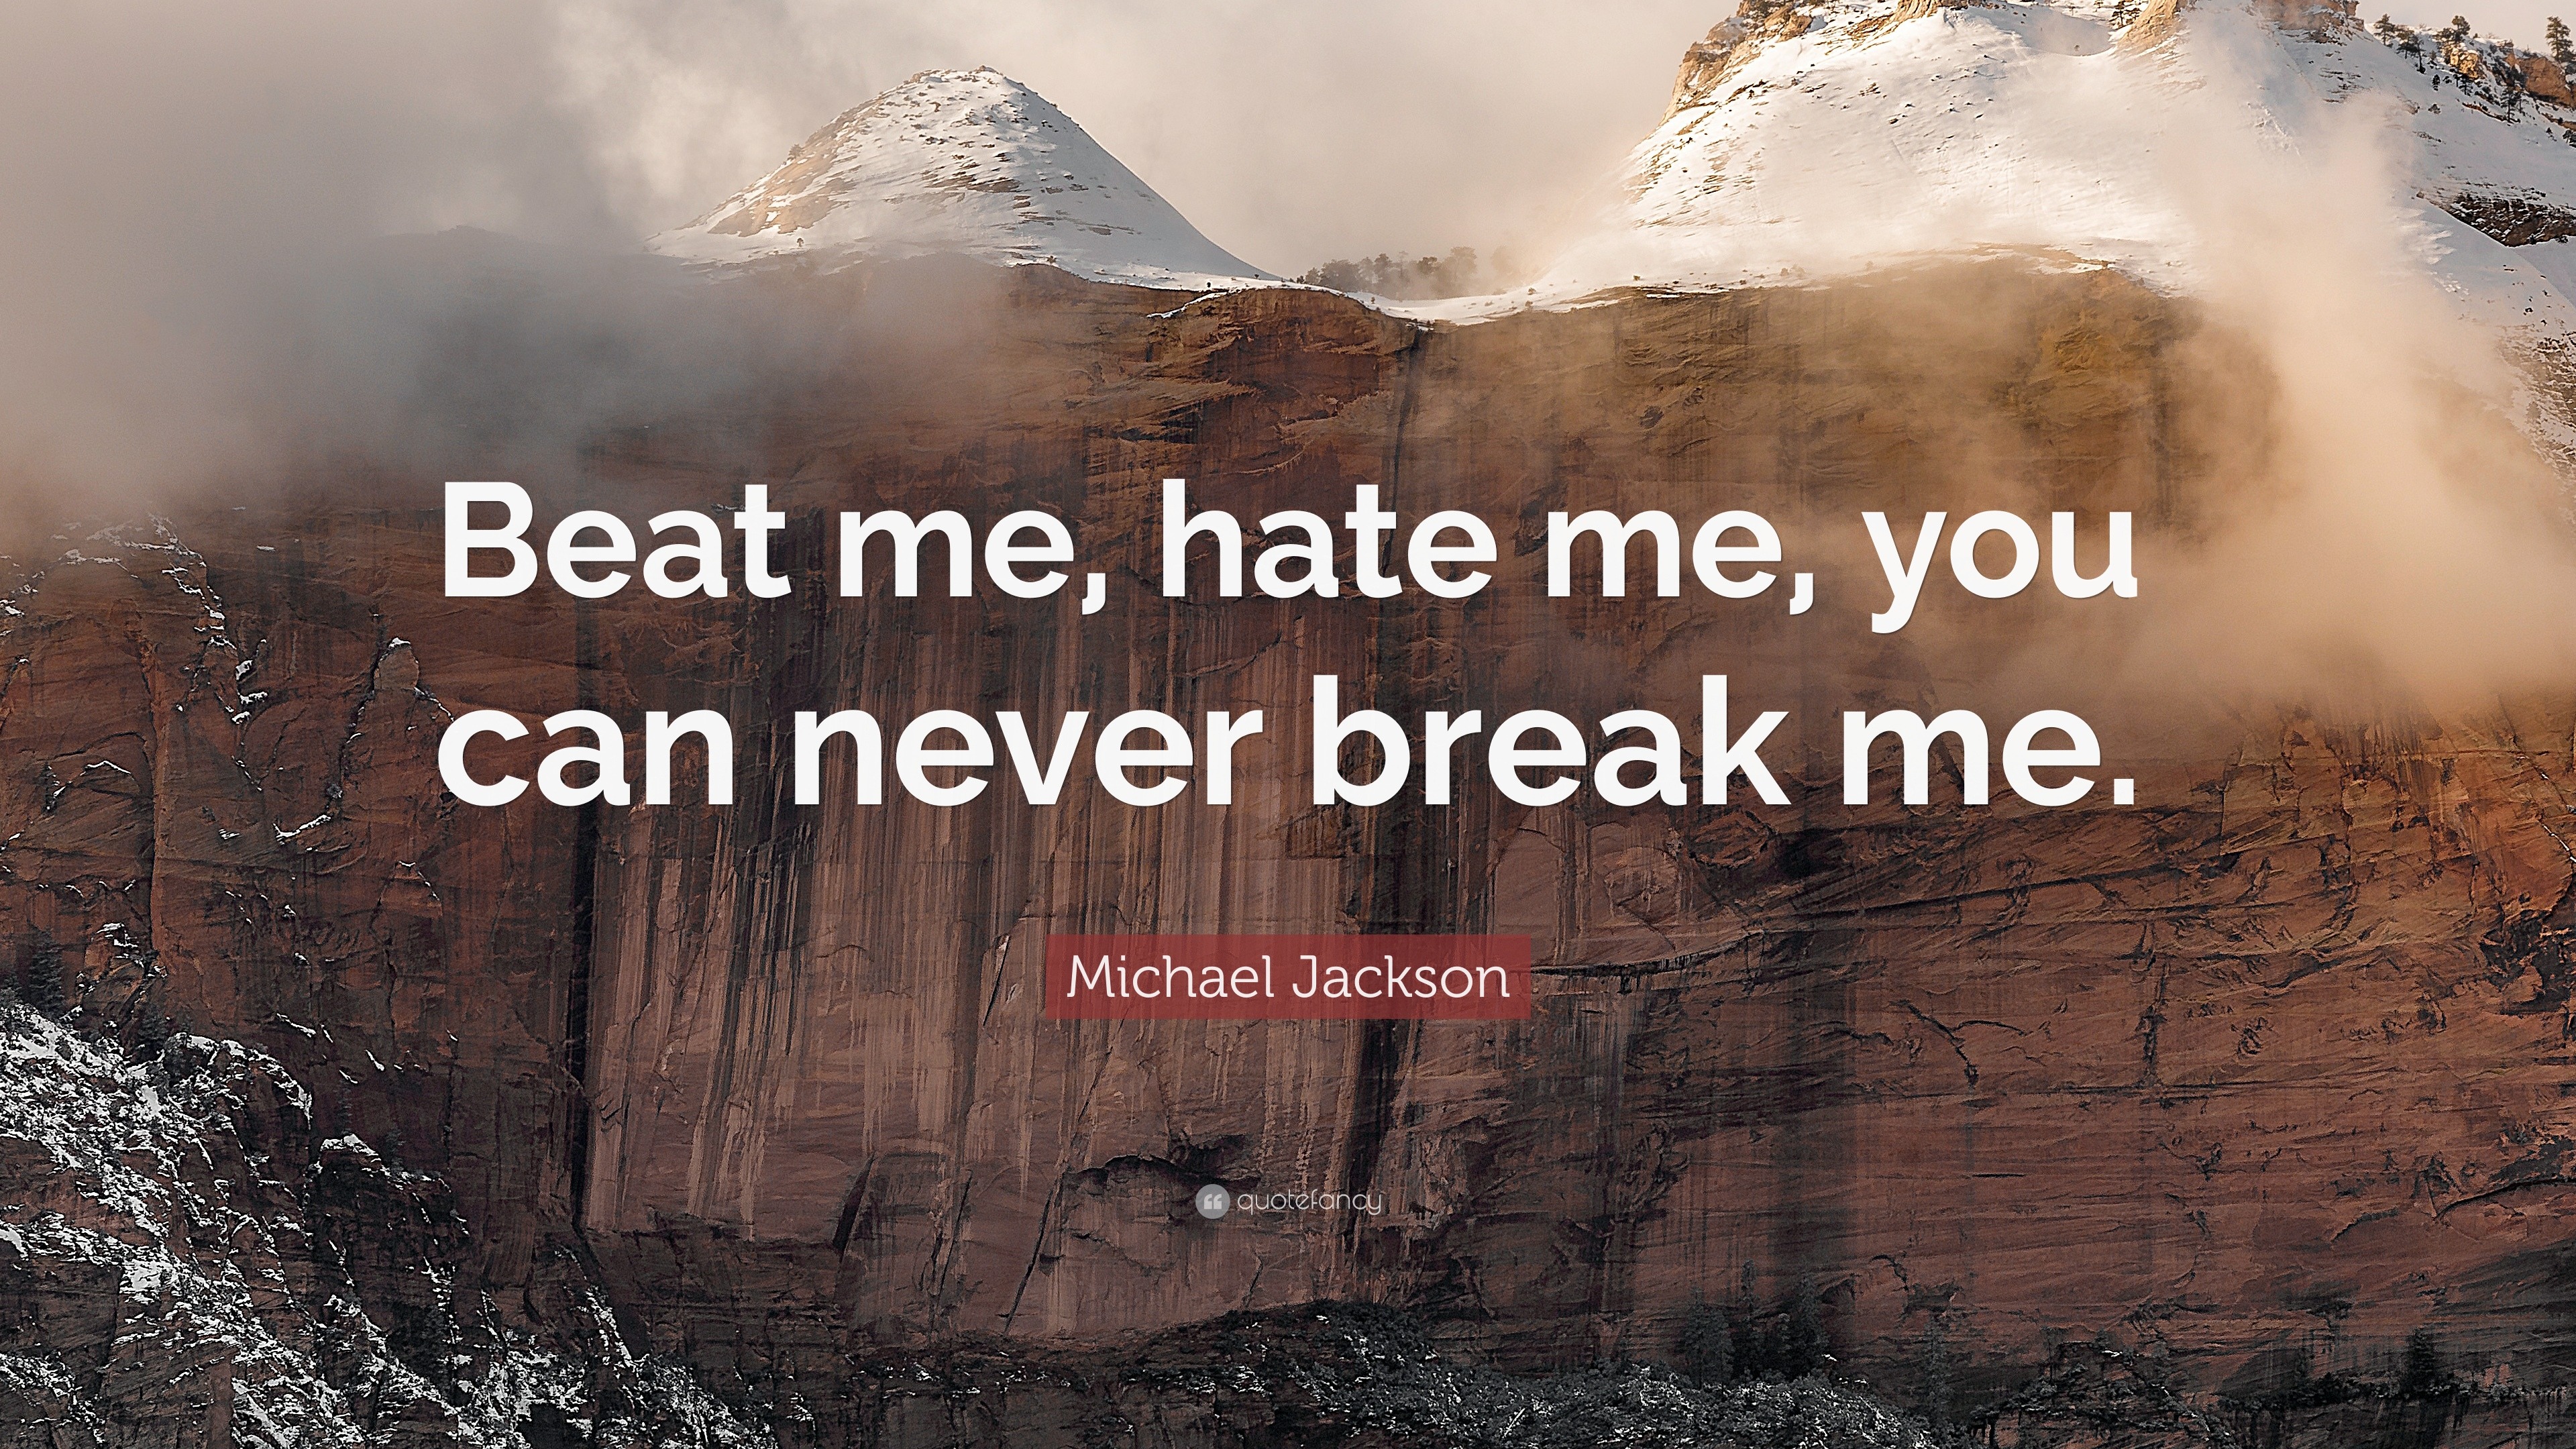 Michael Jackson Quote “Beat me hate me you can never break me